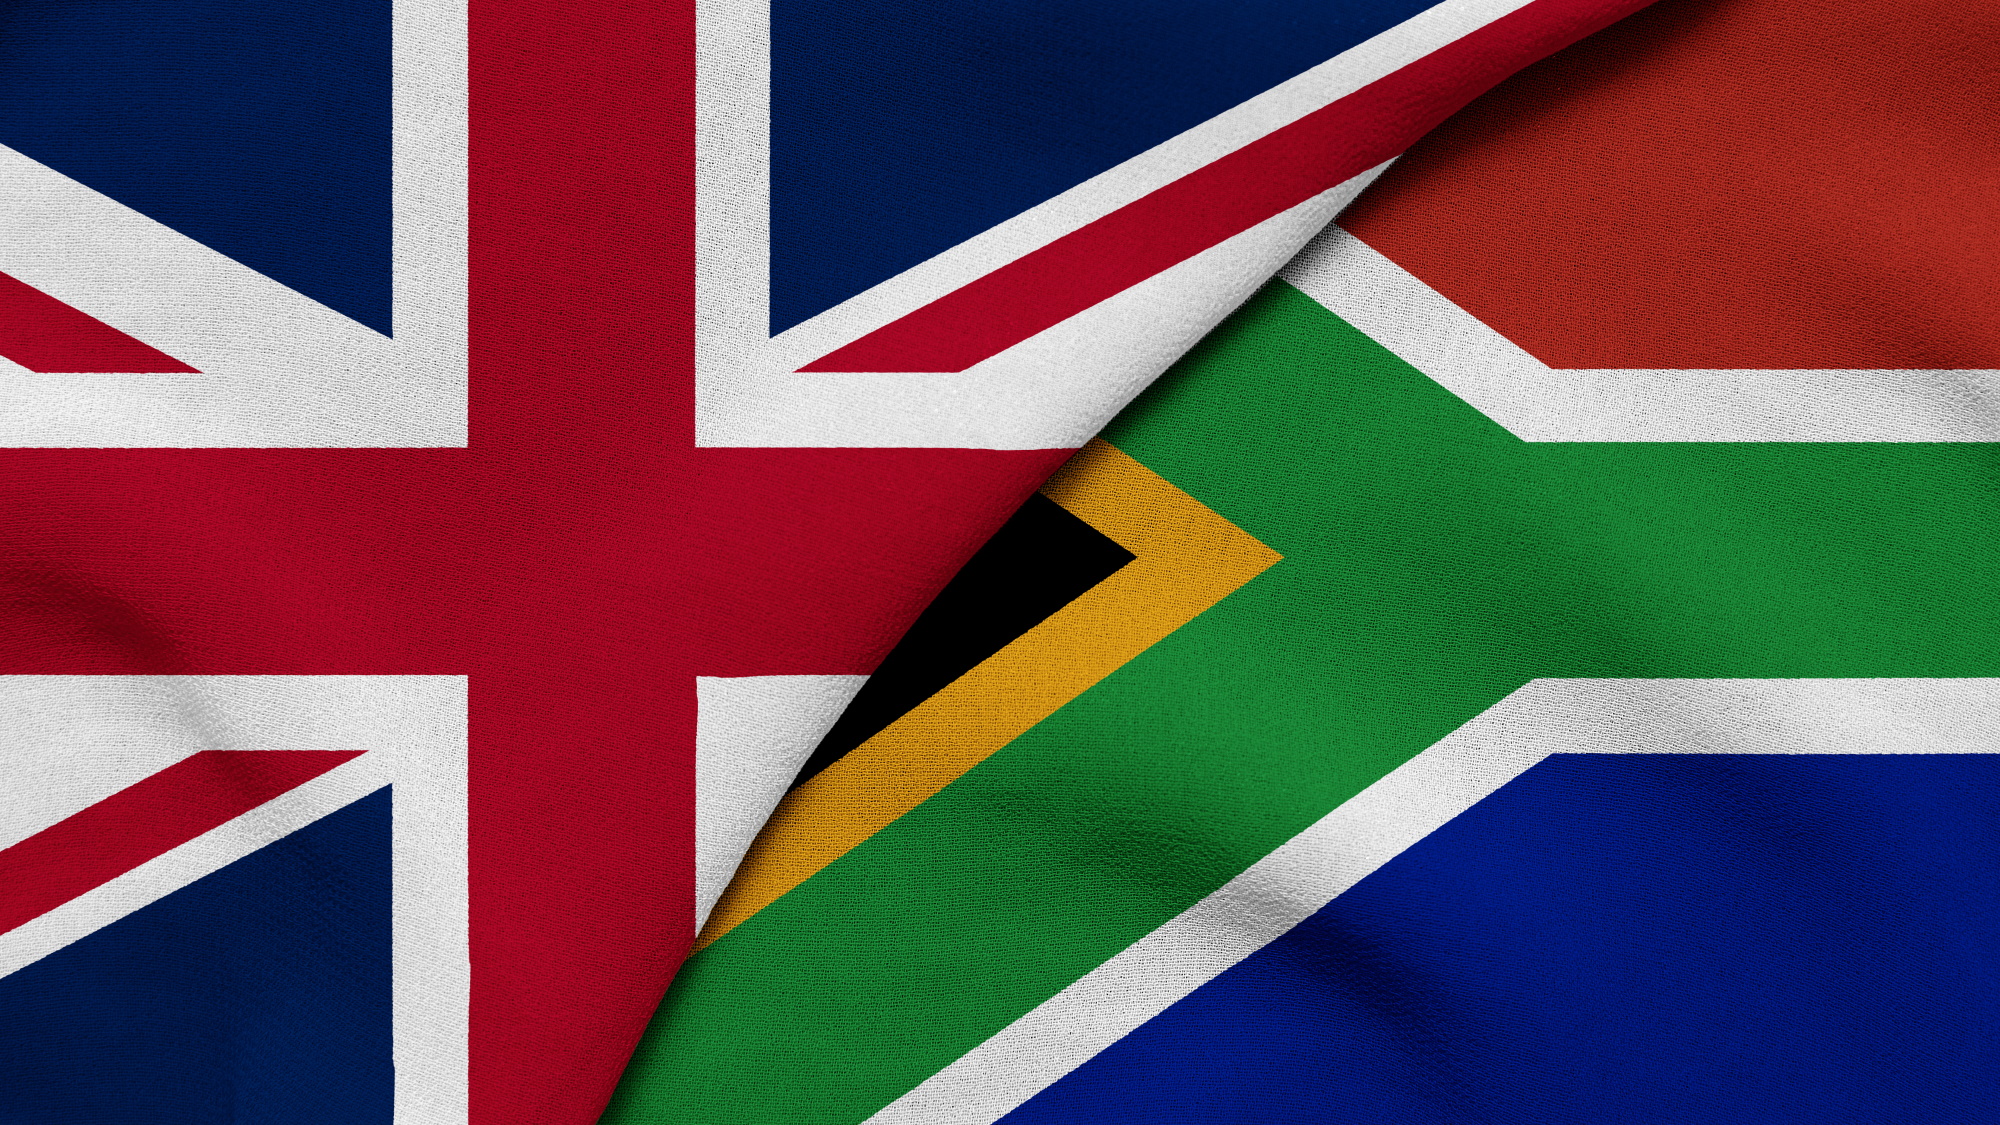 UK and South Africa flags